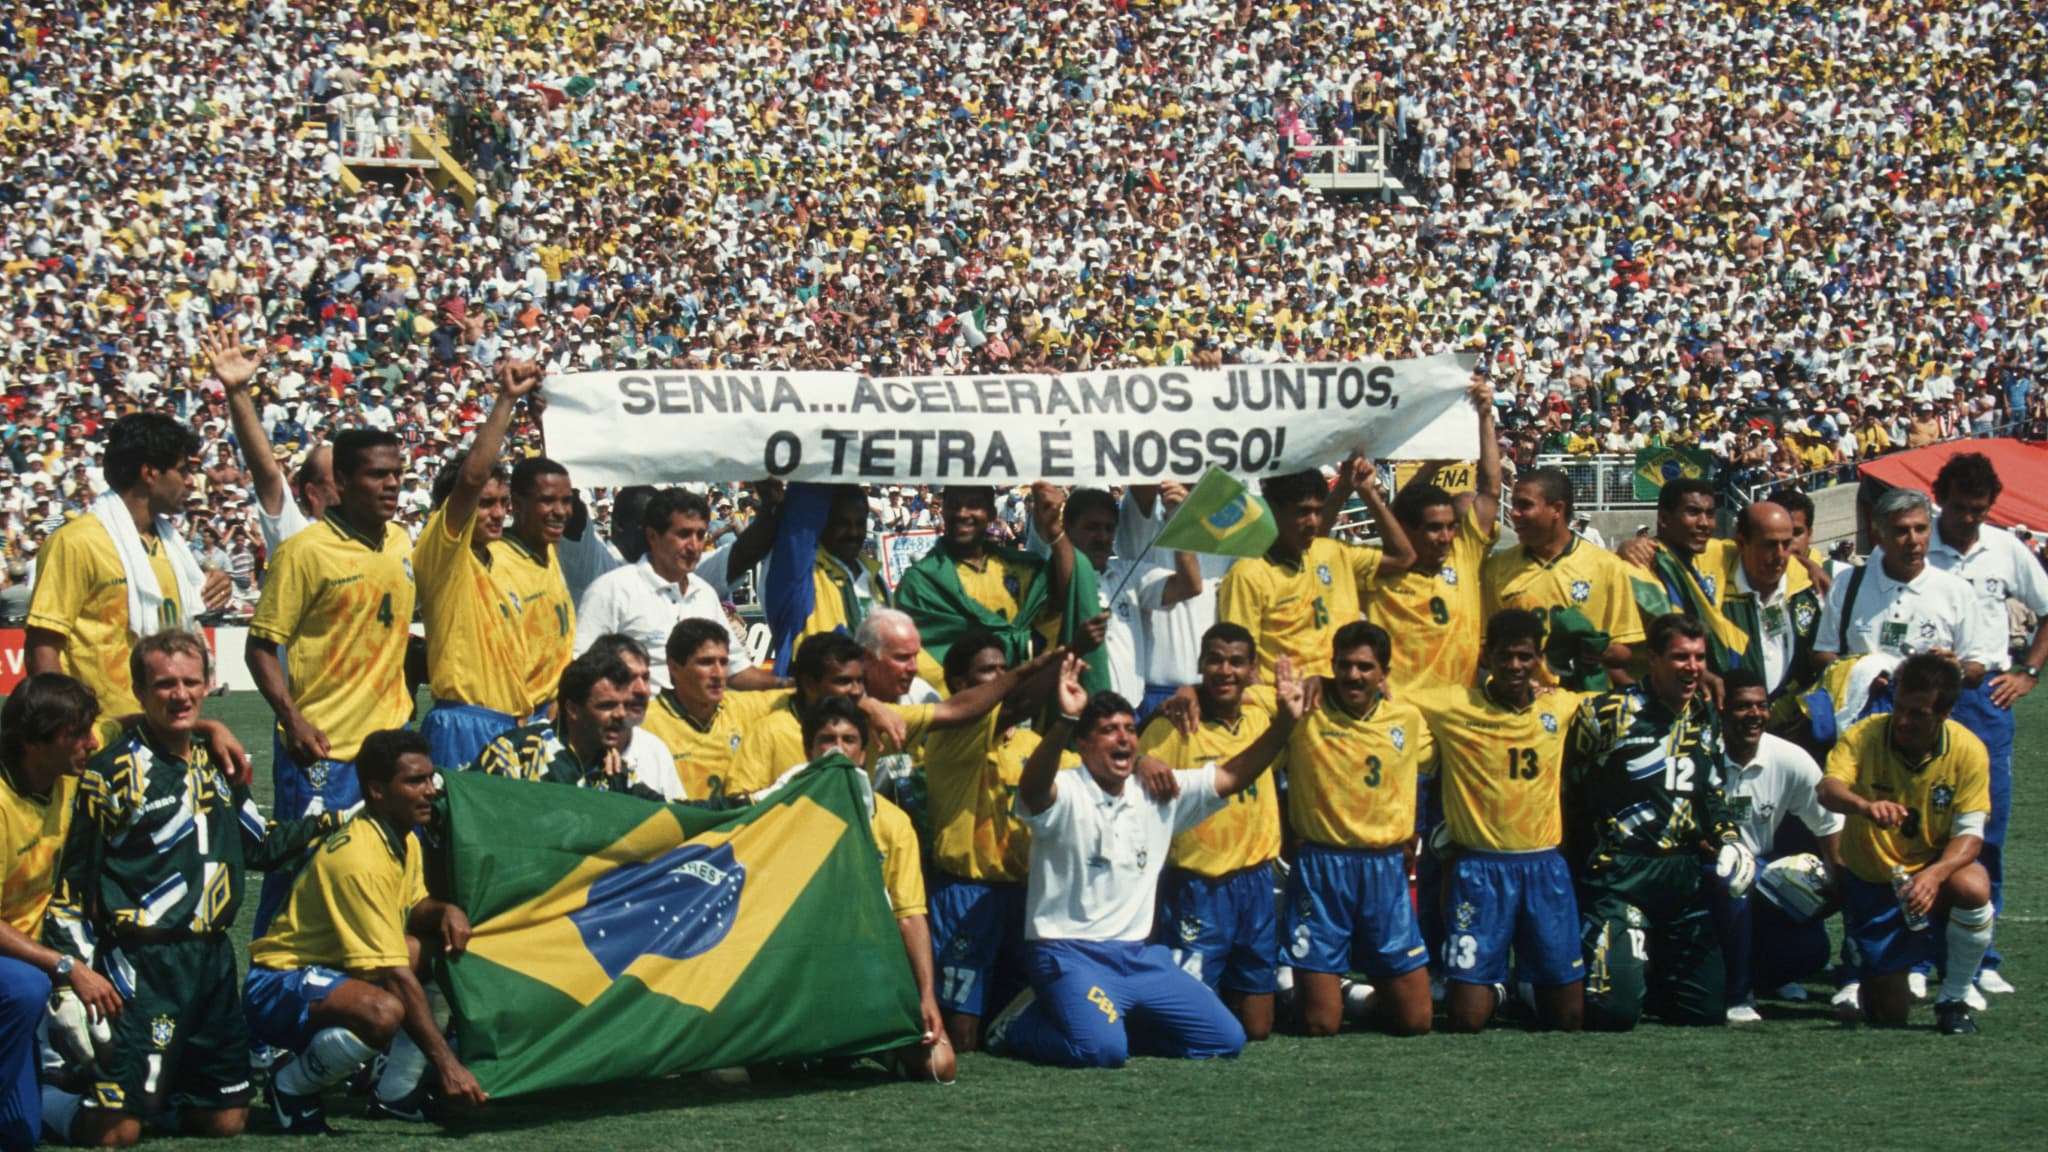 The Brazil of the USA 94